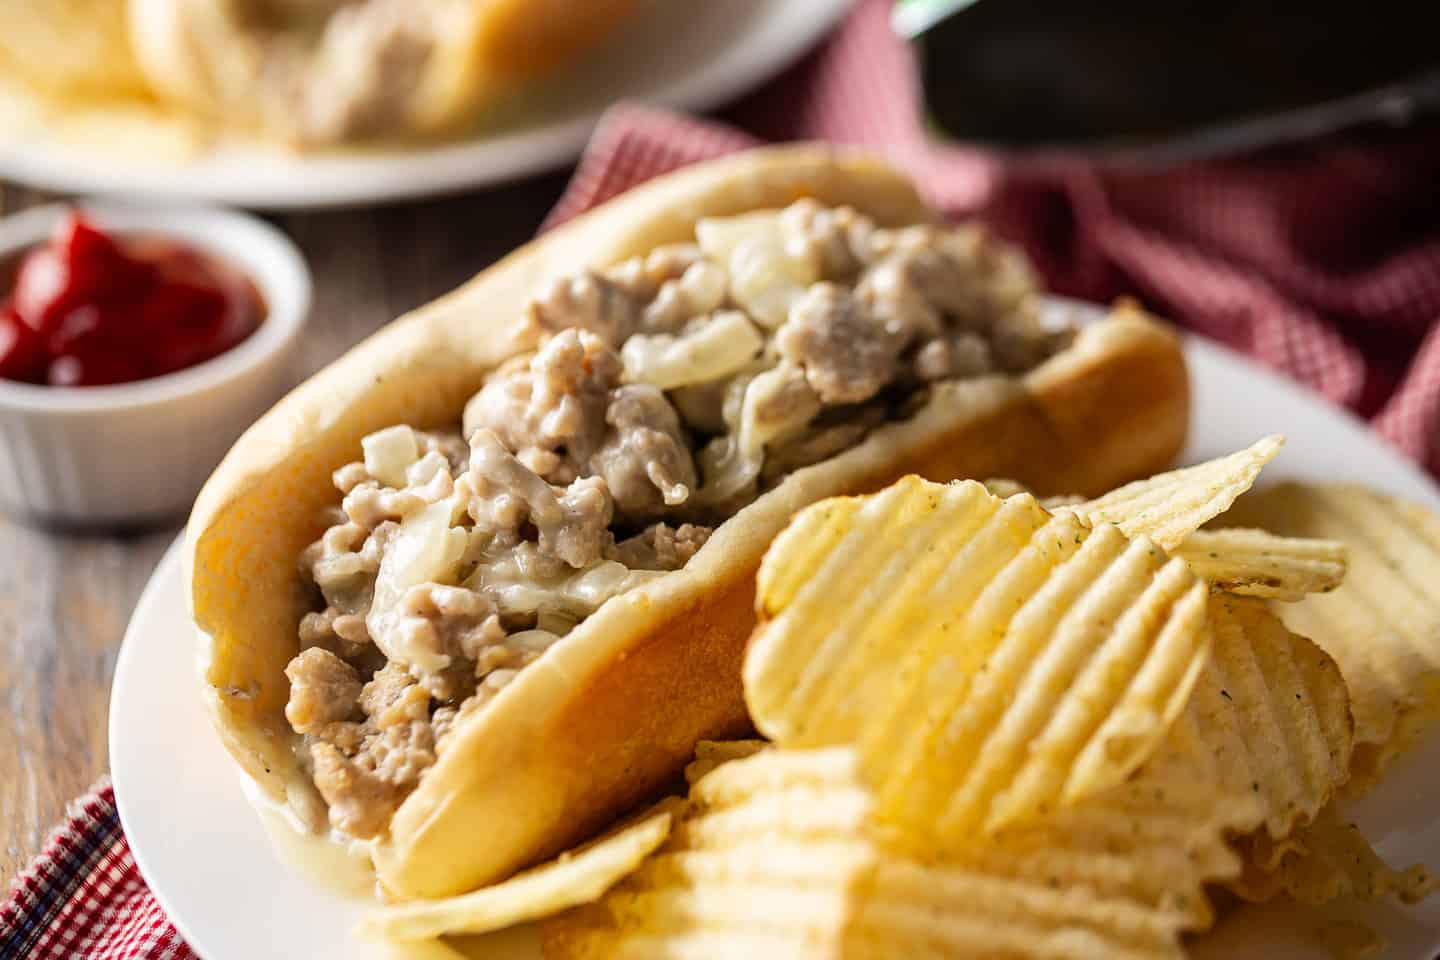 Chicken cheesesteaks recipe, prepared and served with potato chips and ketchup on the side.